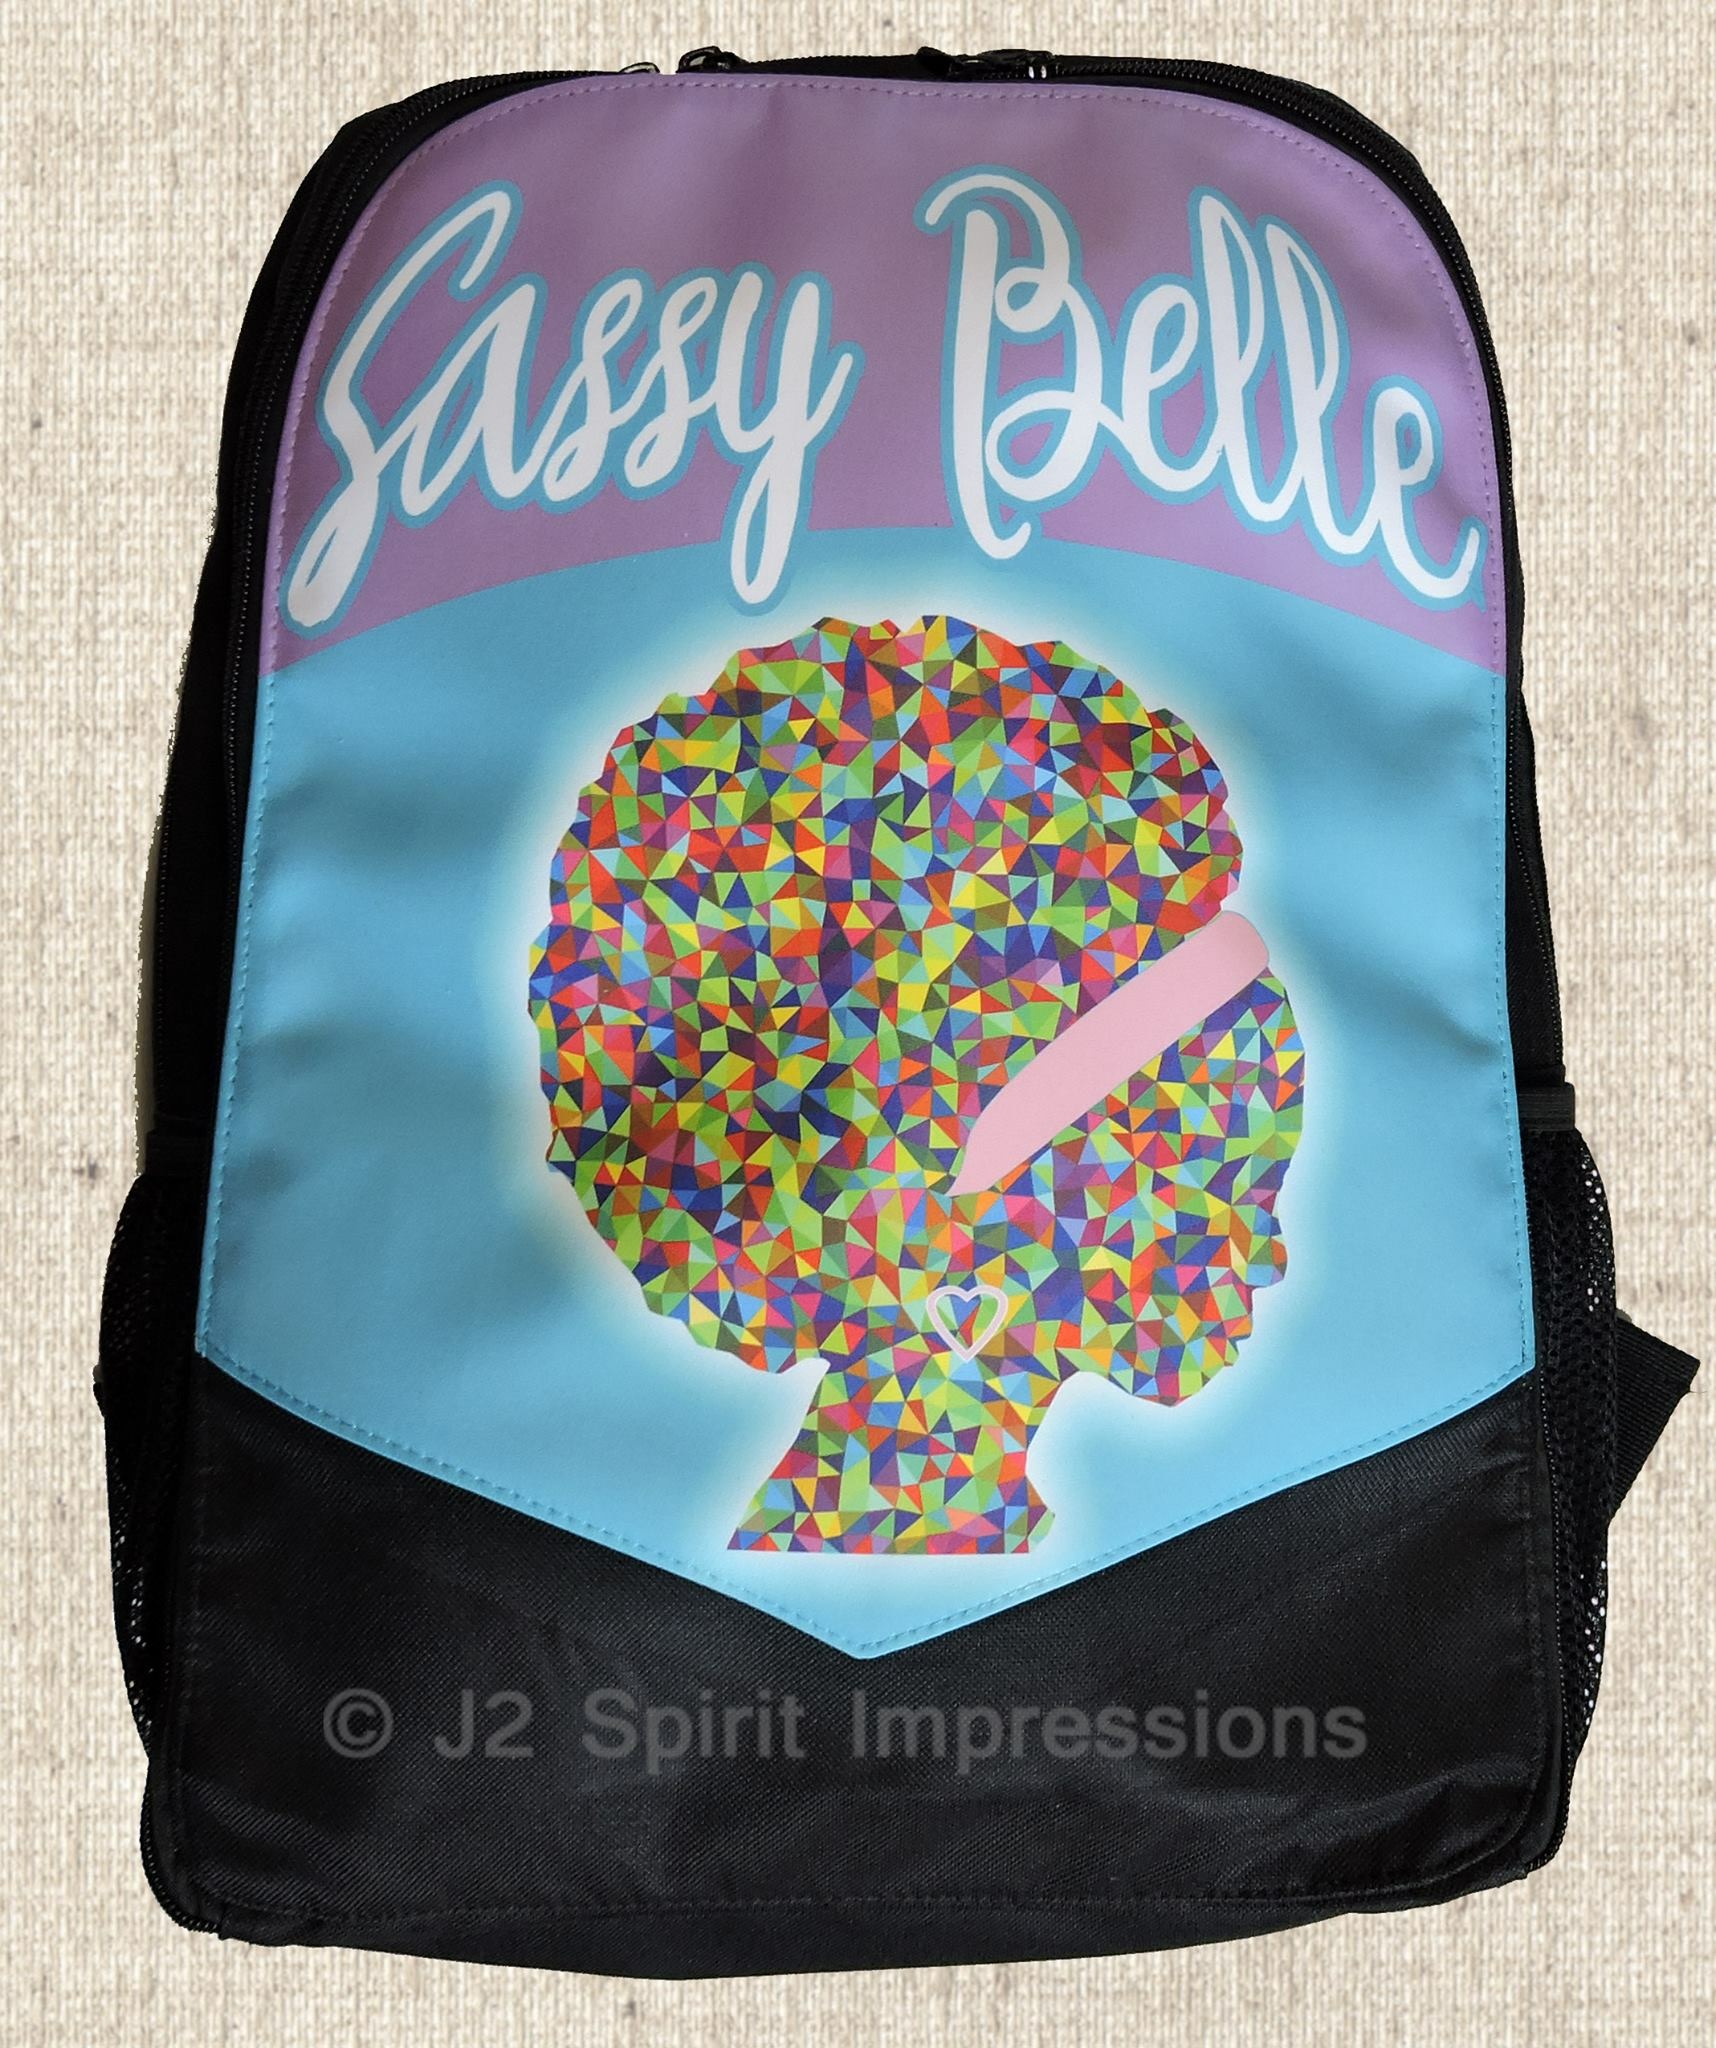 Personalized child backpack